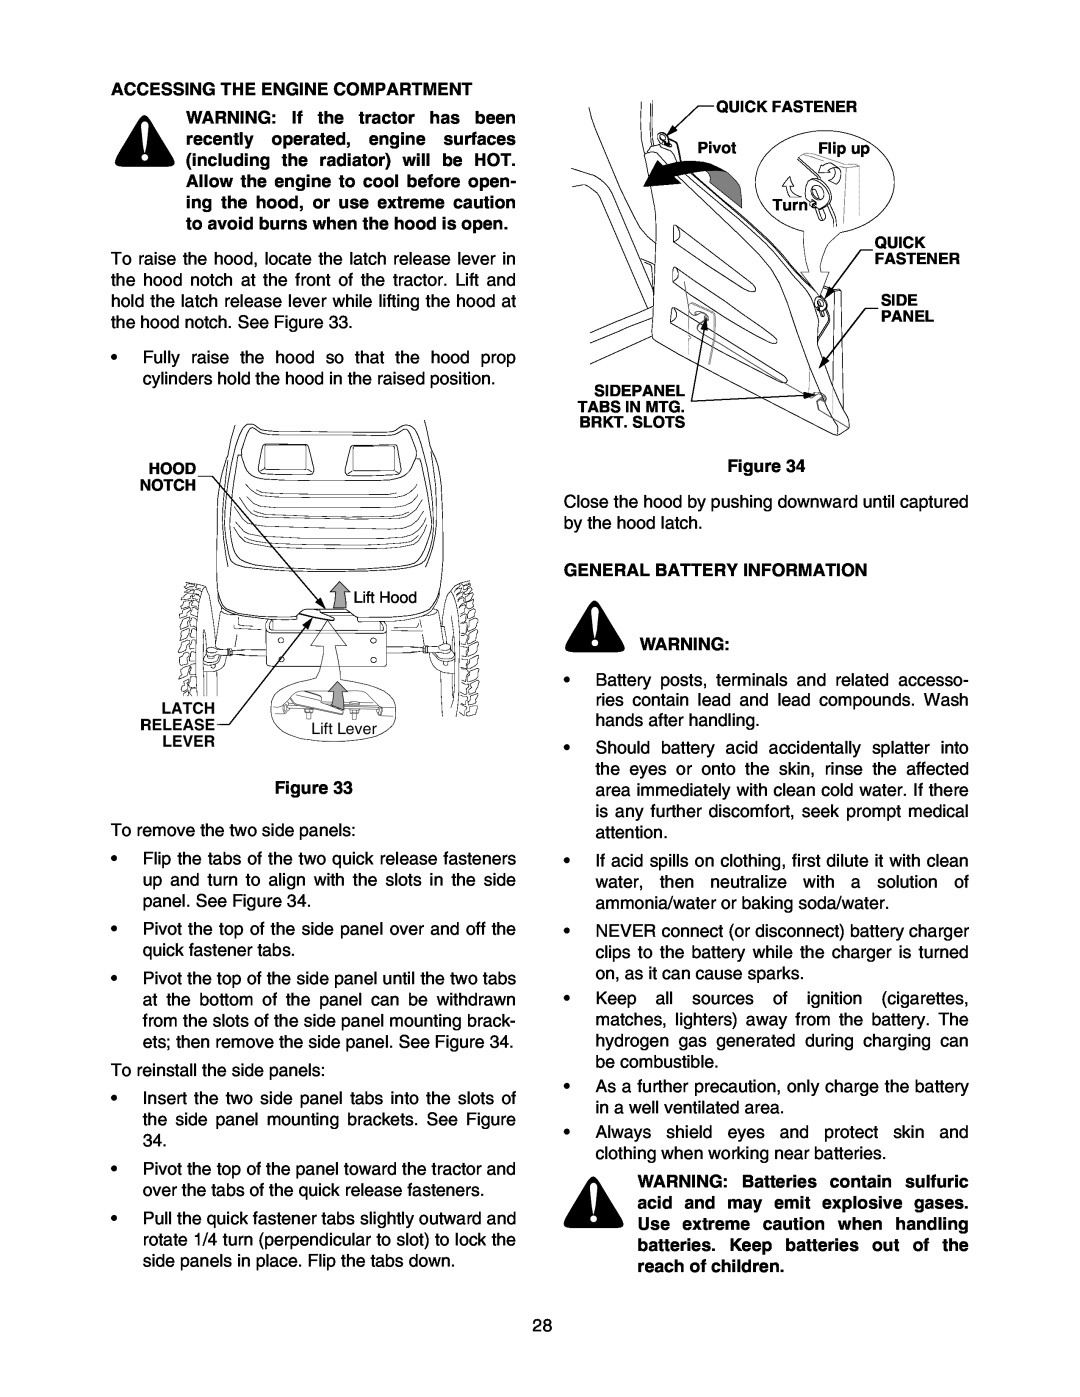 Cub Cadet 5254 manual Accessing The Engine Compartment, General Battery Information 